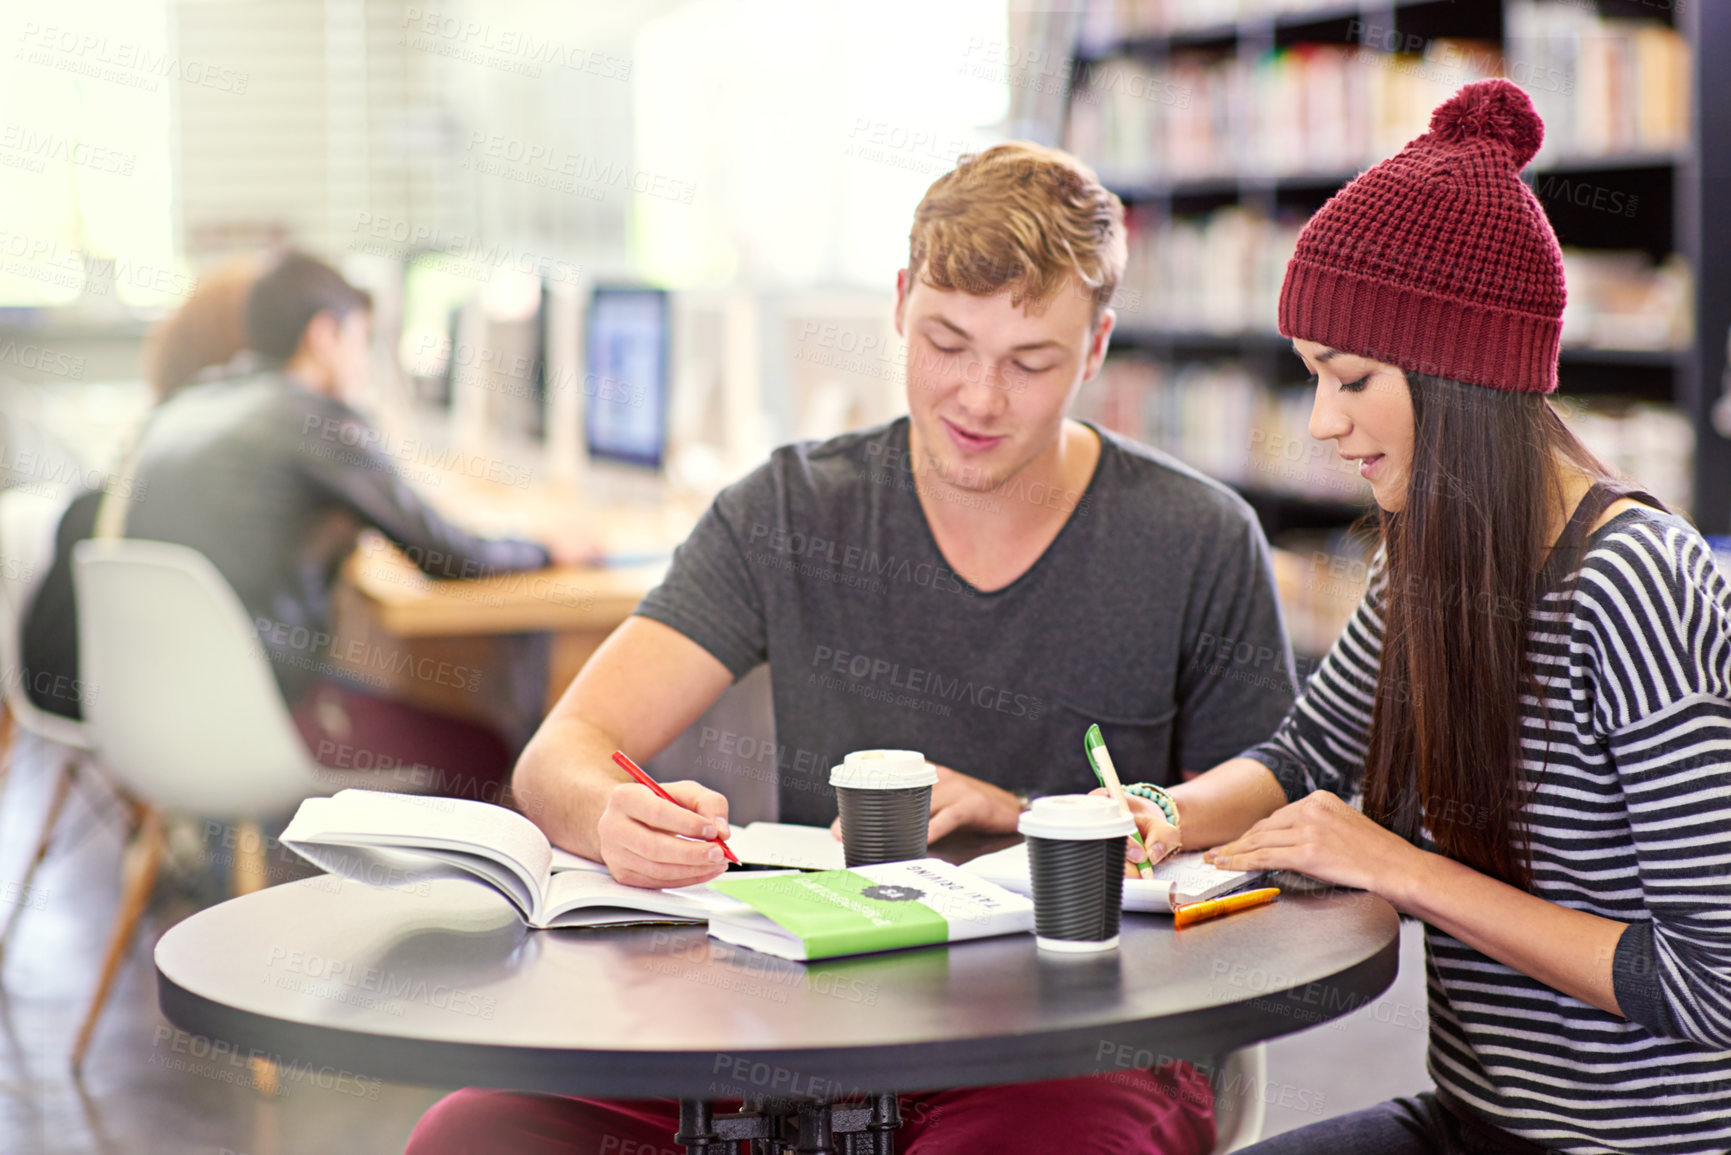 Buy stock photo Shot of two college students studying together at the library